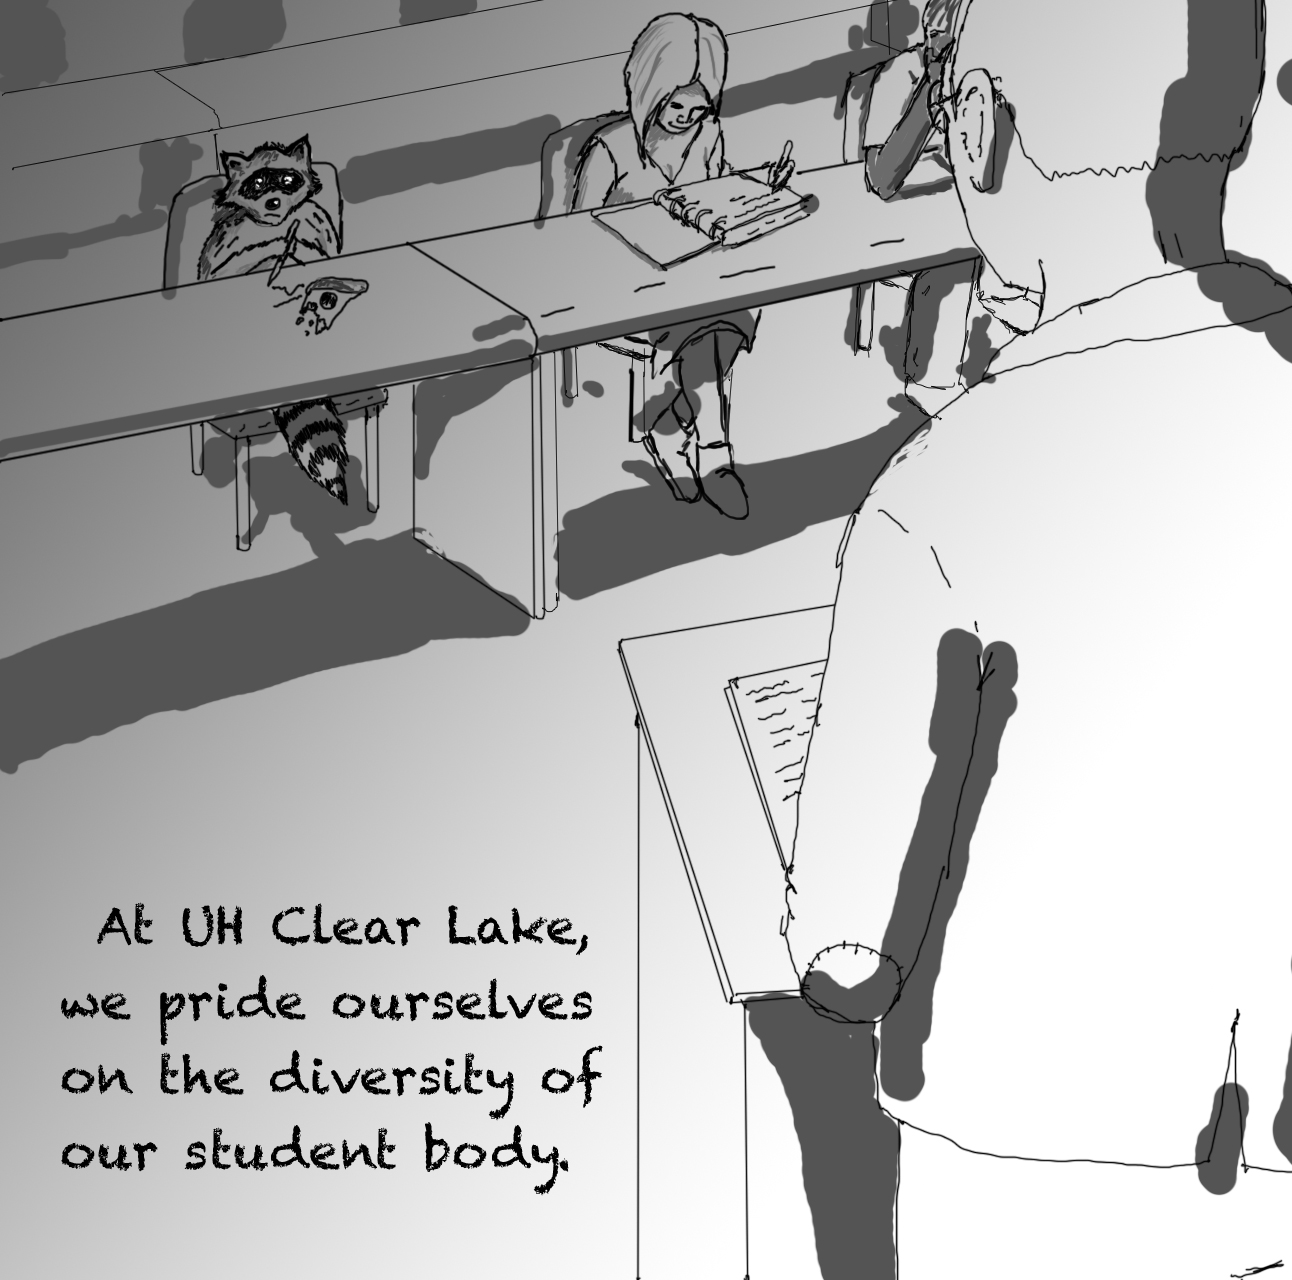 CARTOON: UHCL Diversity by art major Levi Rosen. Cartoon depicts a raccoon in a classroom setting with other students and a professor, with the caption "At UH Clear Lake, we pride ourselves on the diversity of our student body."